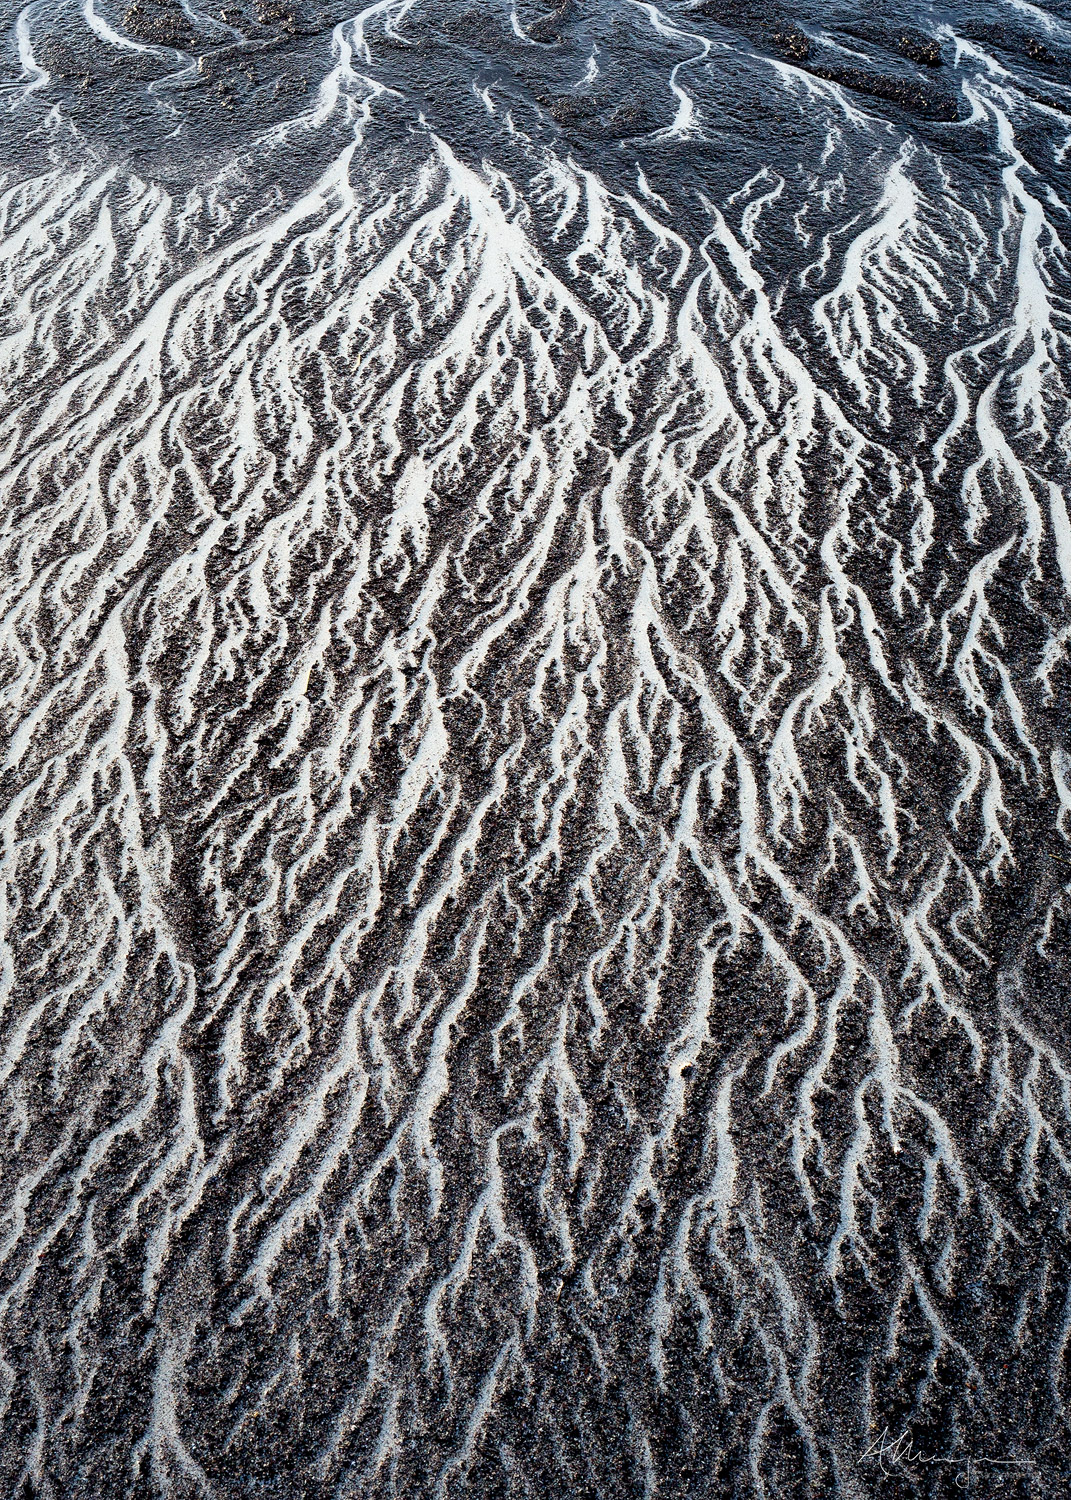 Black and white sand on a Norwegian beach form patterns that look like running ink